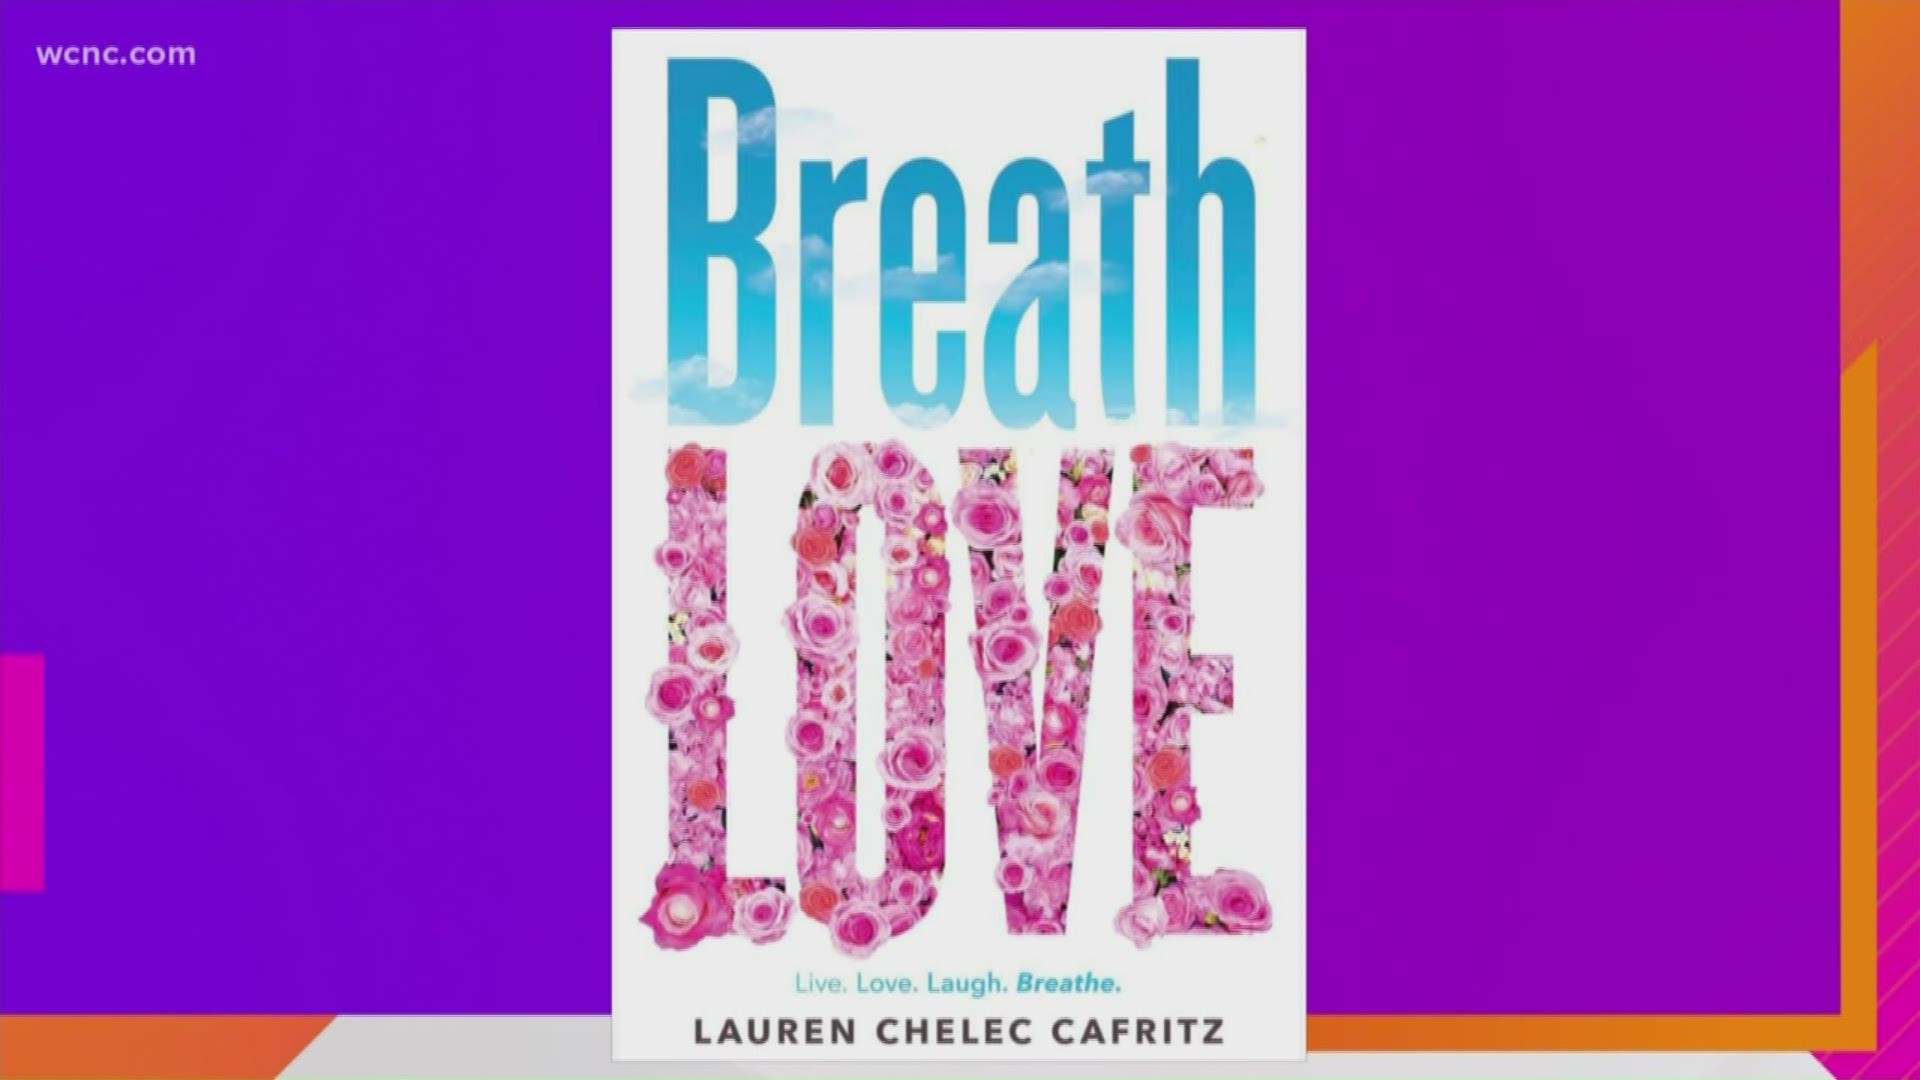 Author of “Breath Love”, Lauren Chelec Cafritz, explains what breathwork is and its health benefits.